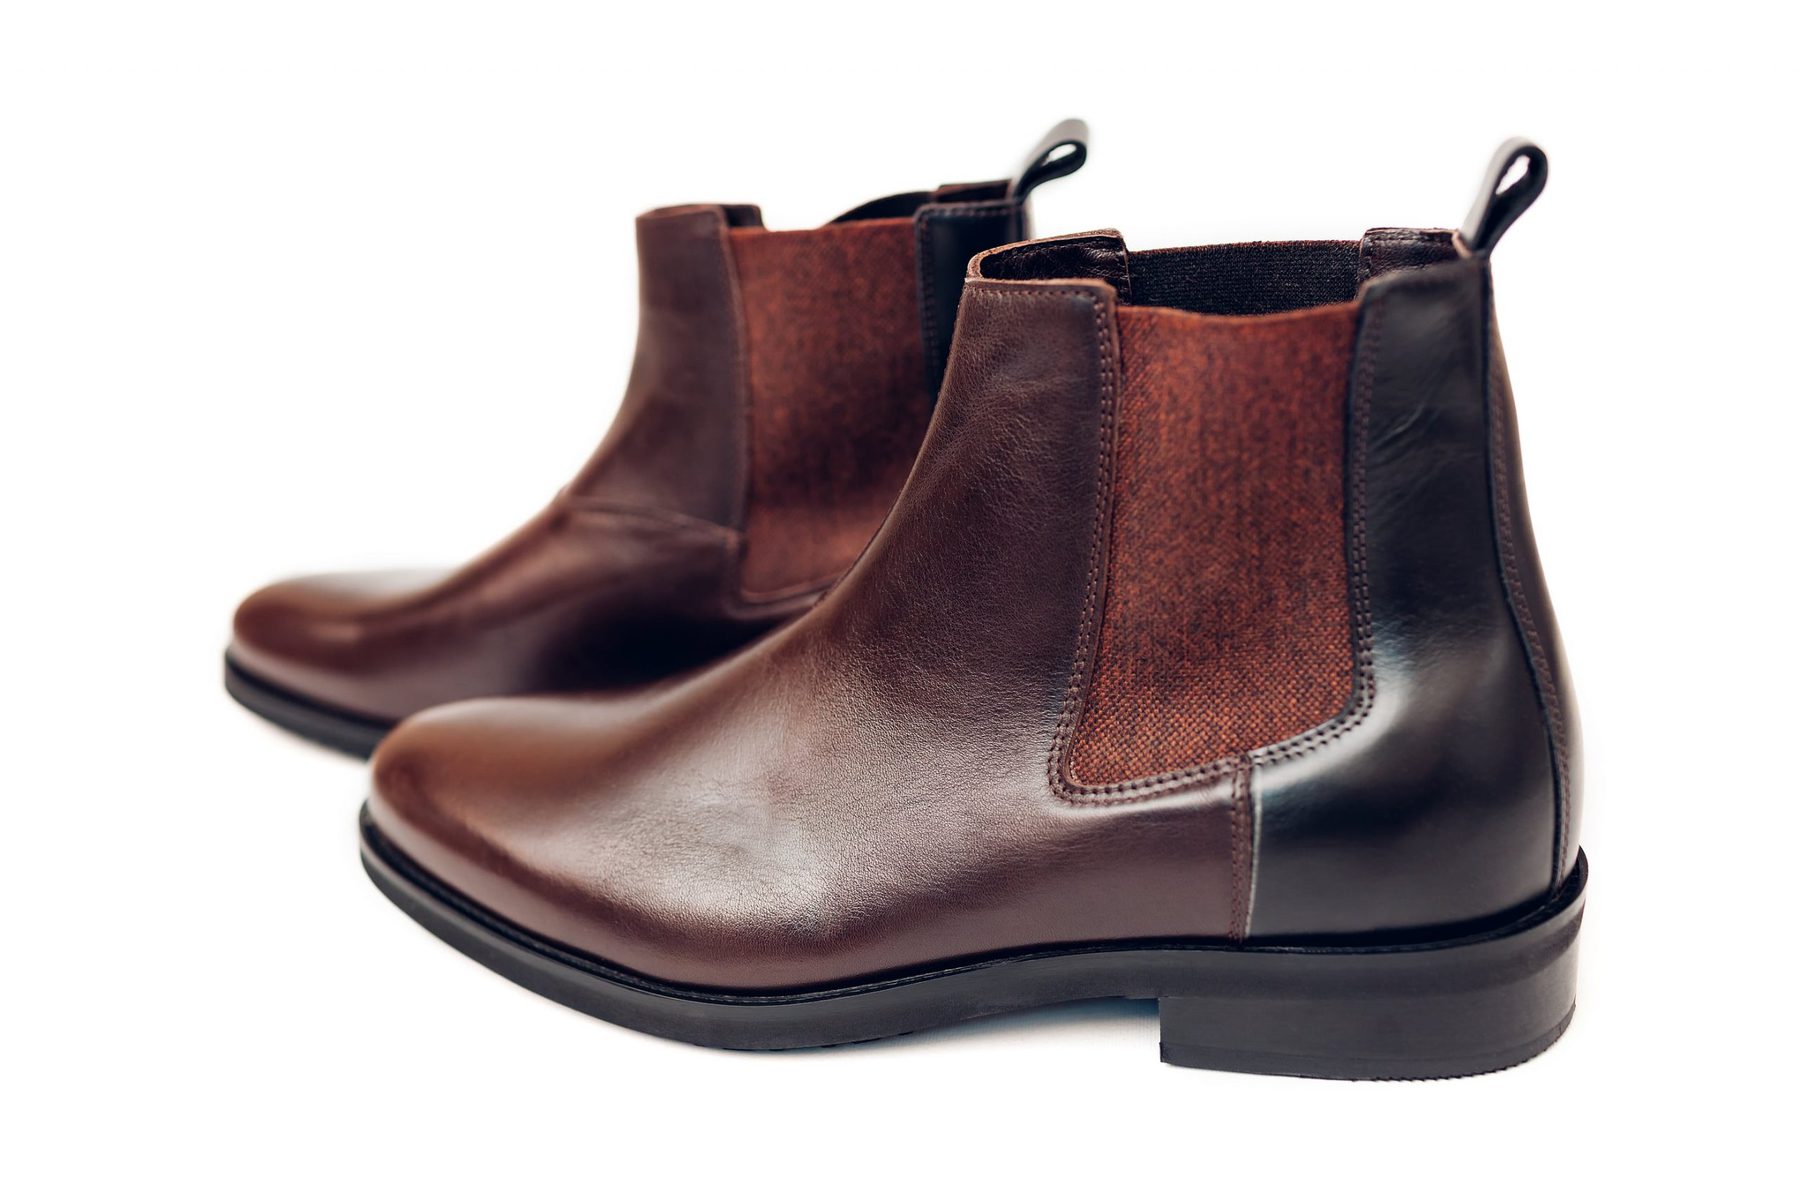 perfect chelsea boot